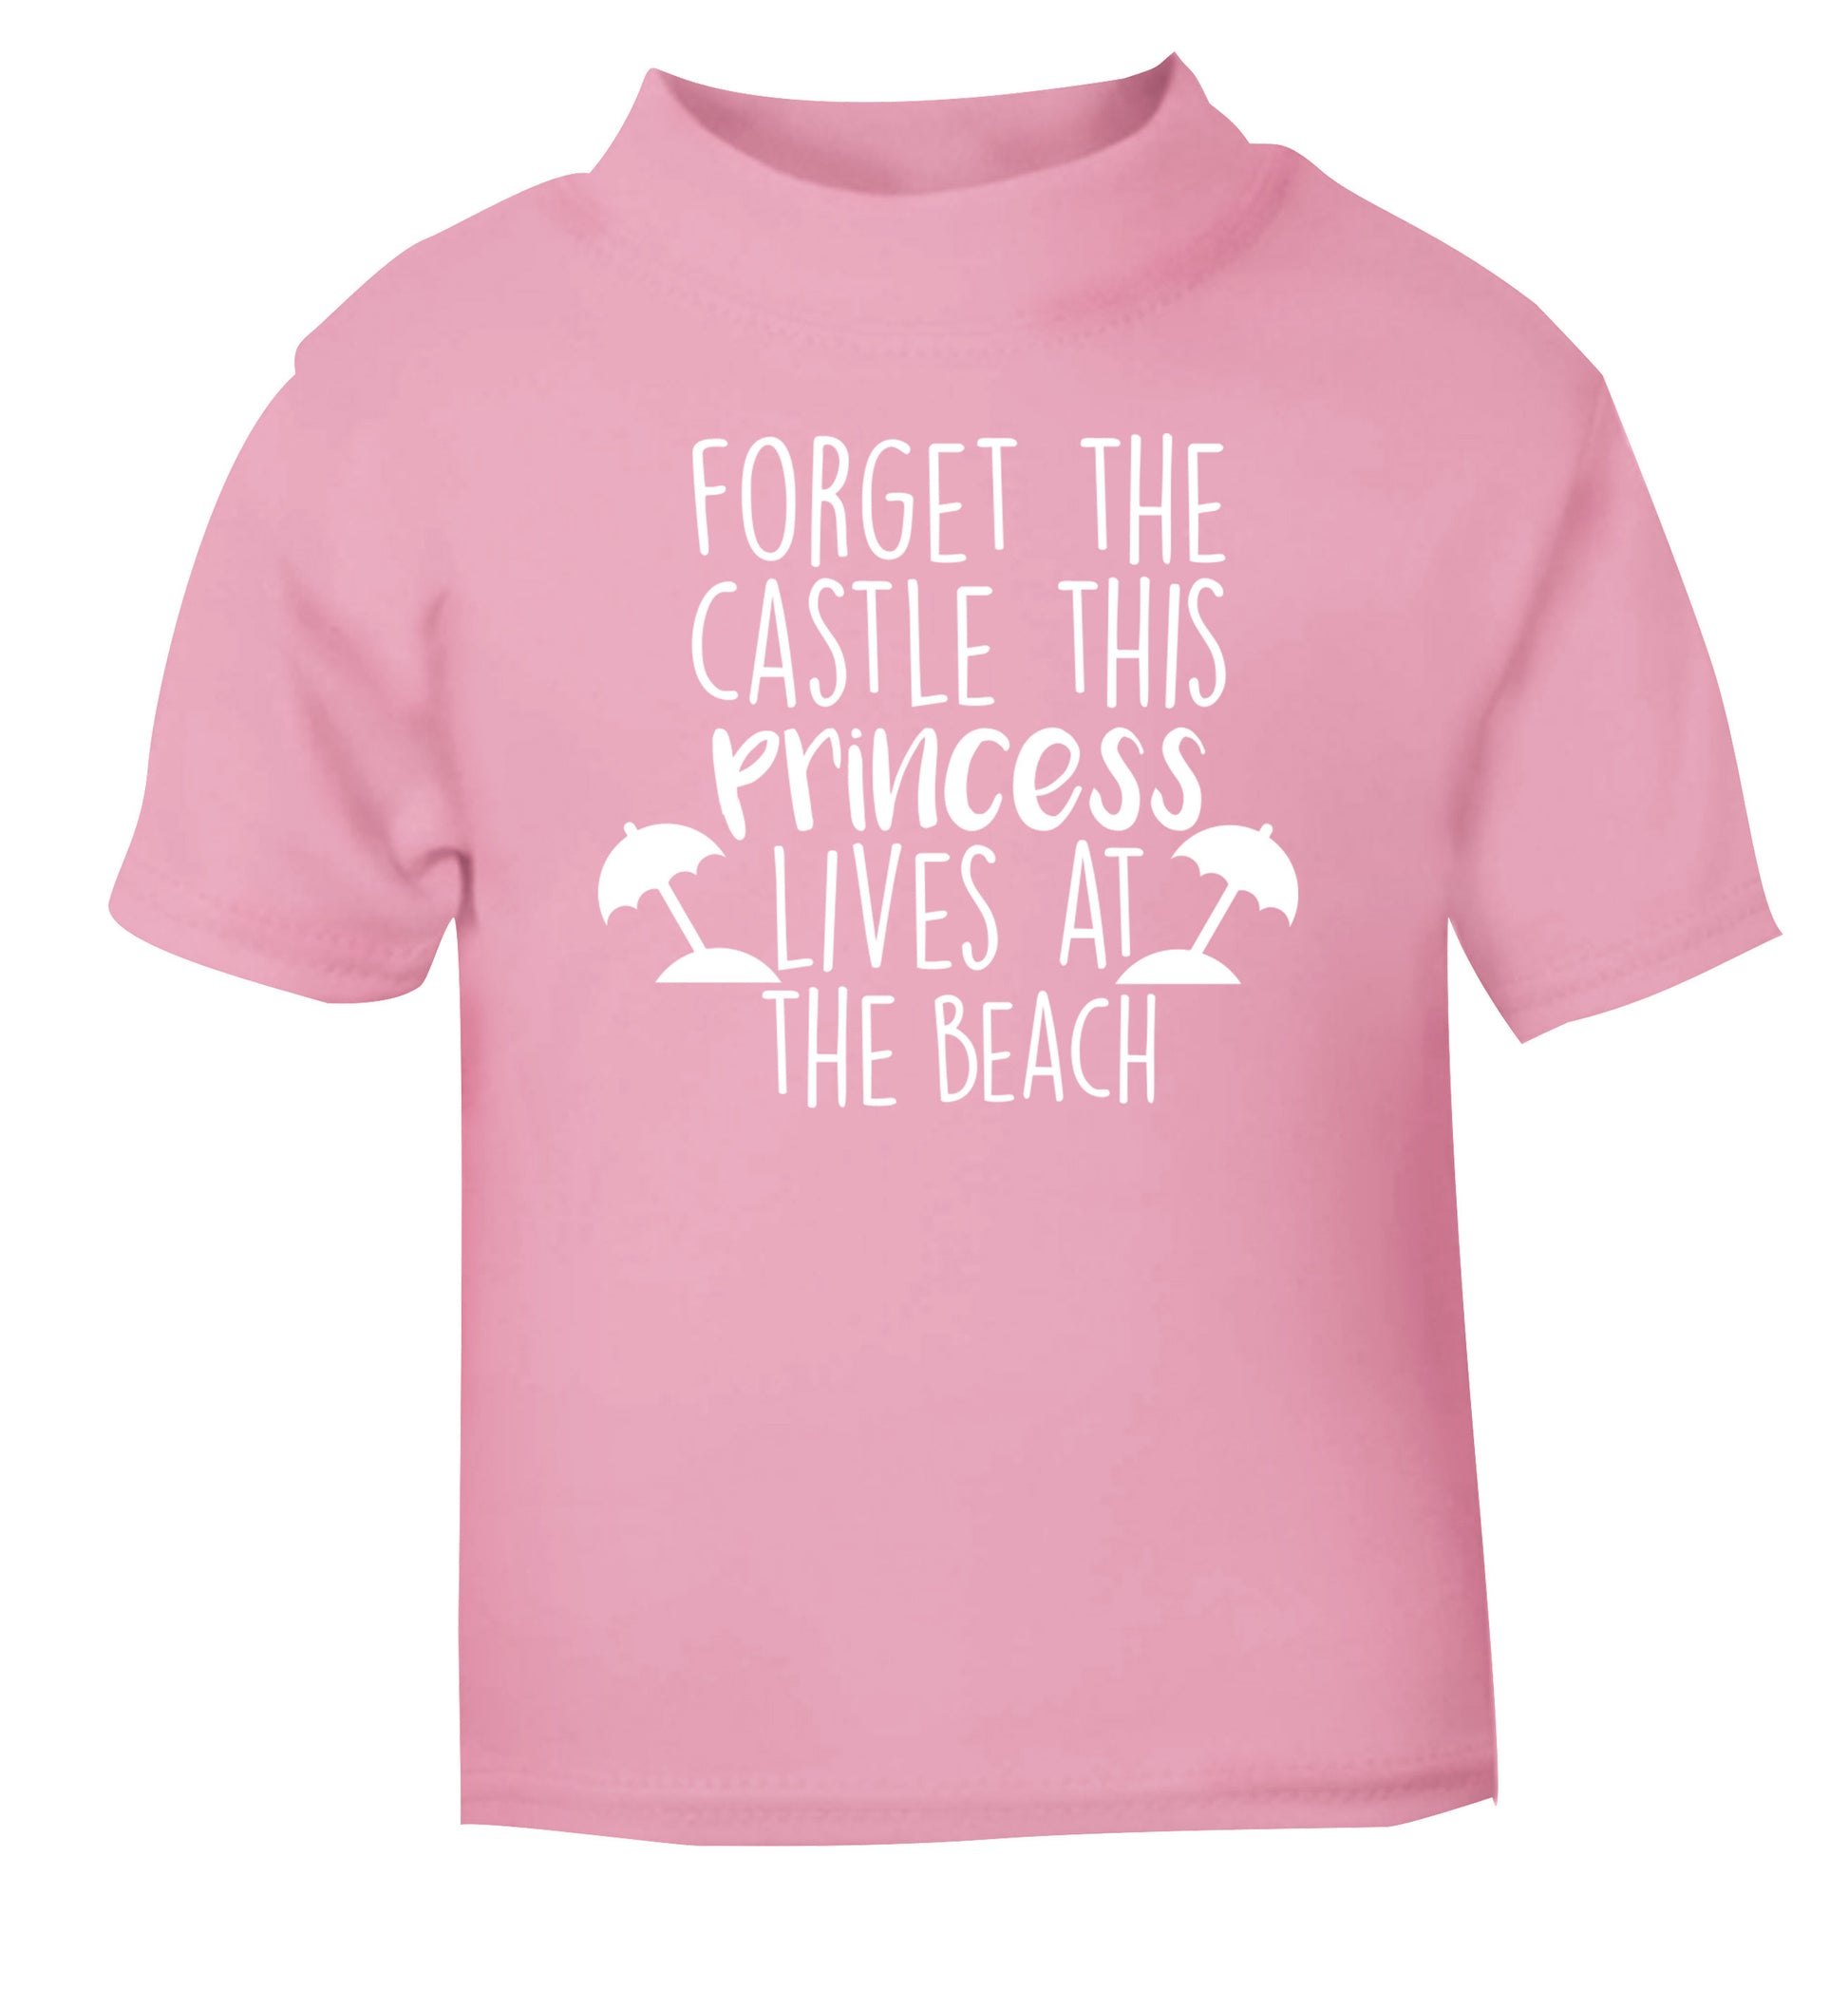 Forget the castle this princess lives at the beach light pink Baby Toddler Tshirt 2 Years